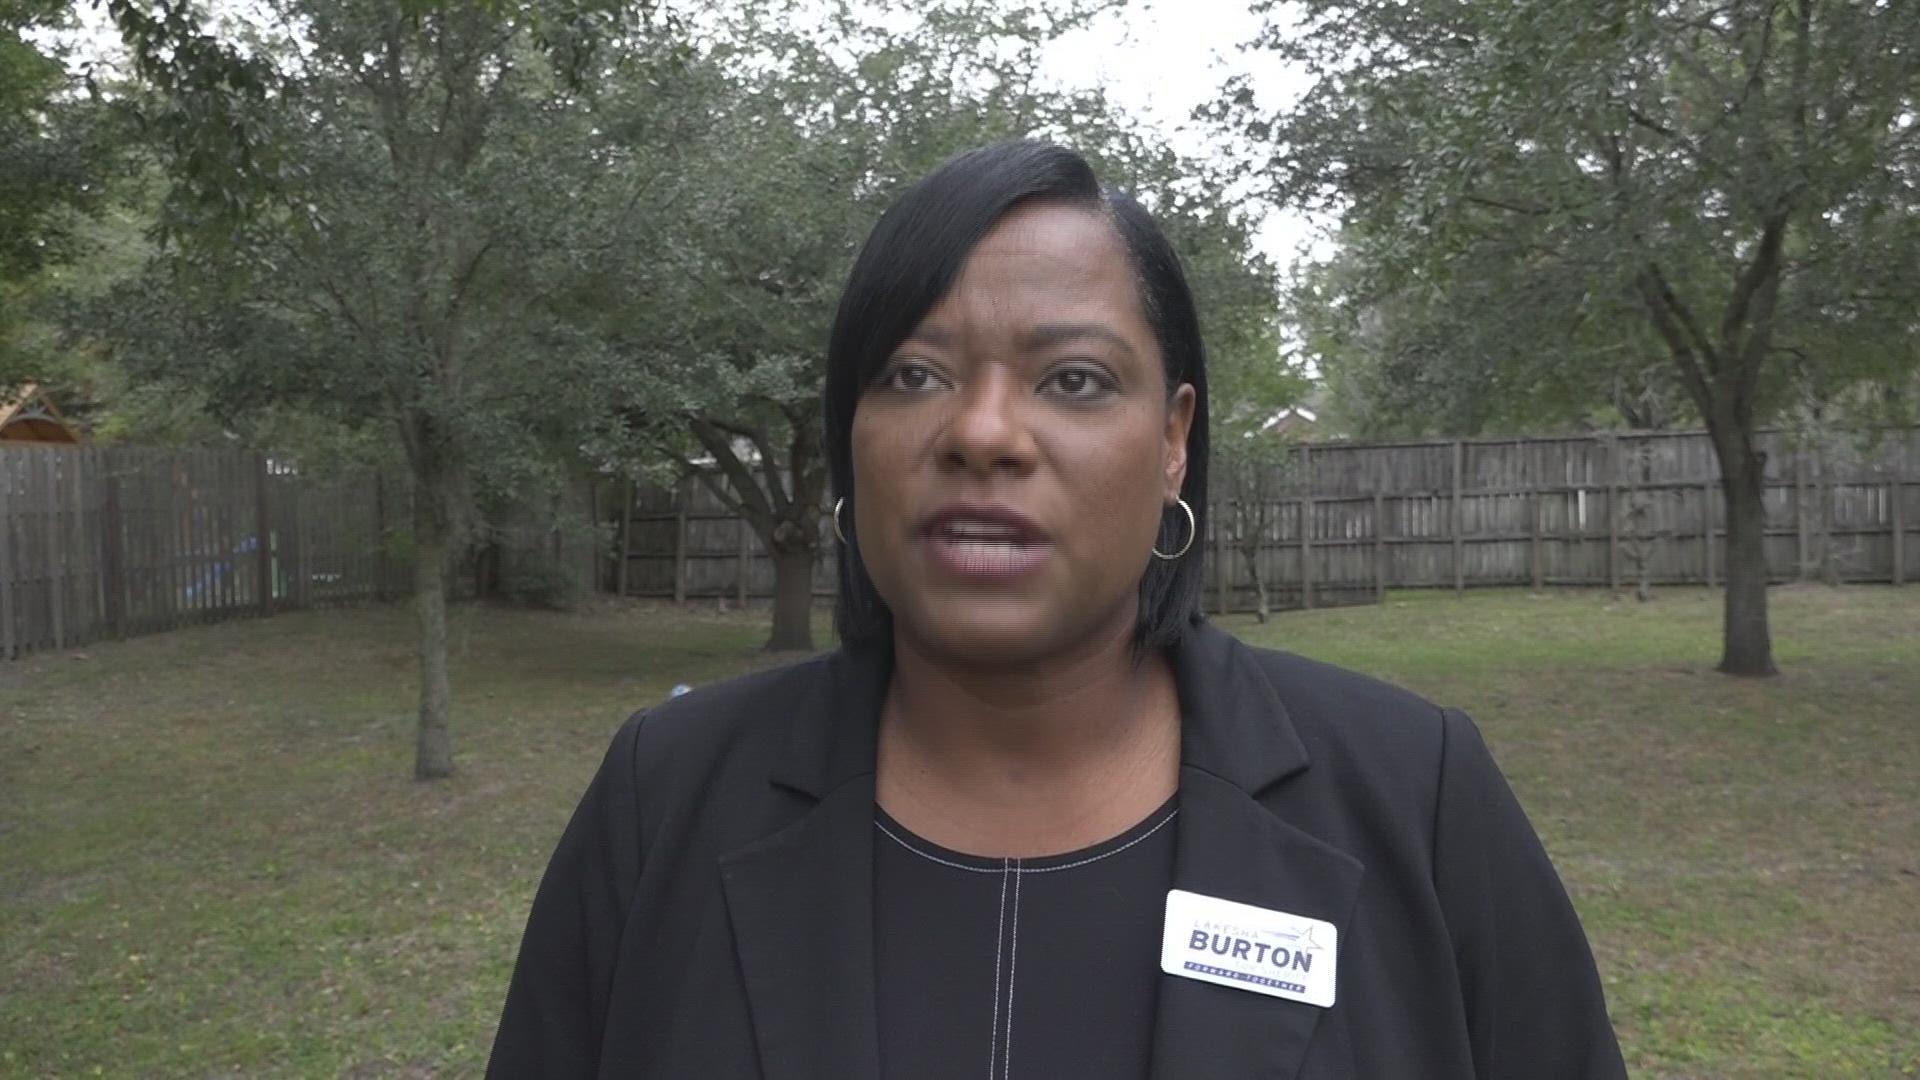 Burton told First Coast News that Jefferson asked for the "number two spot" in exchange for his endorsement.